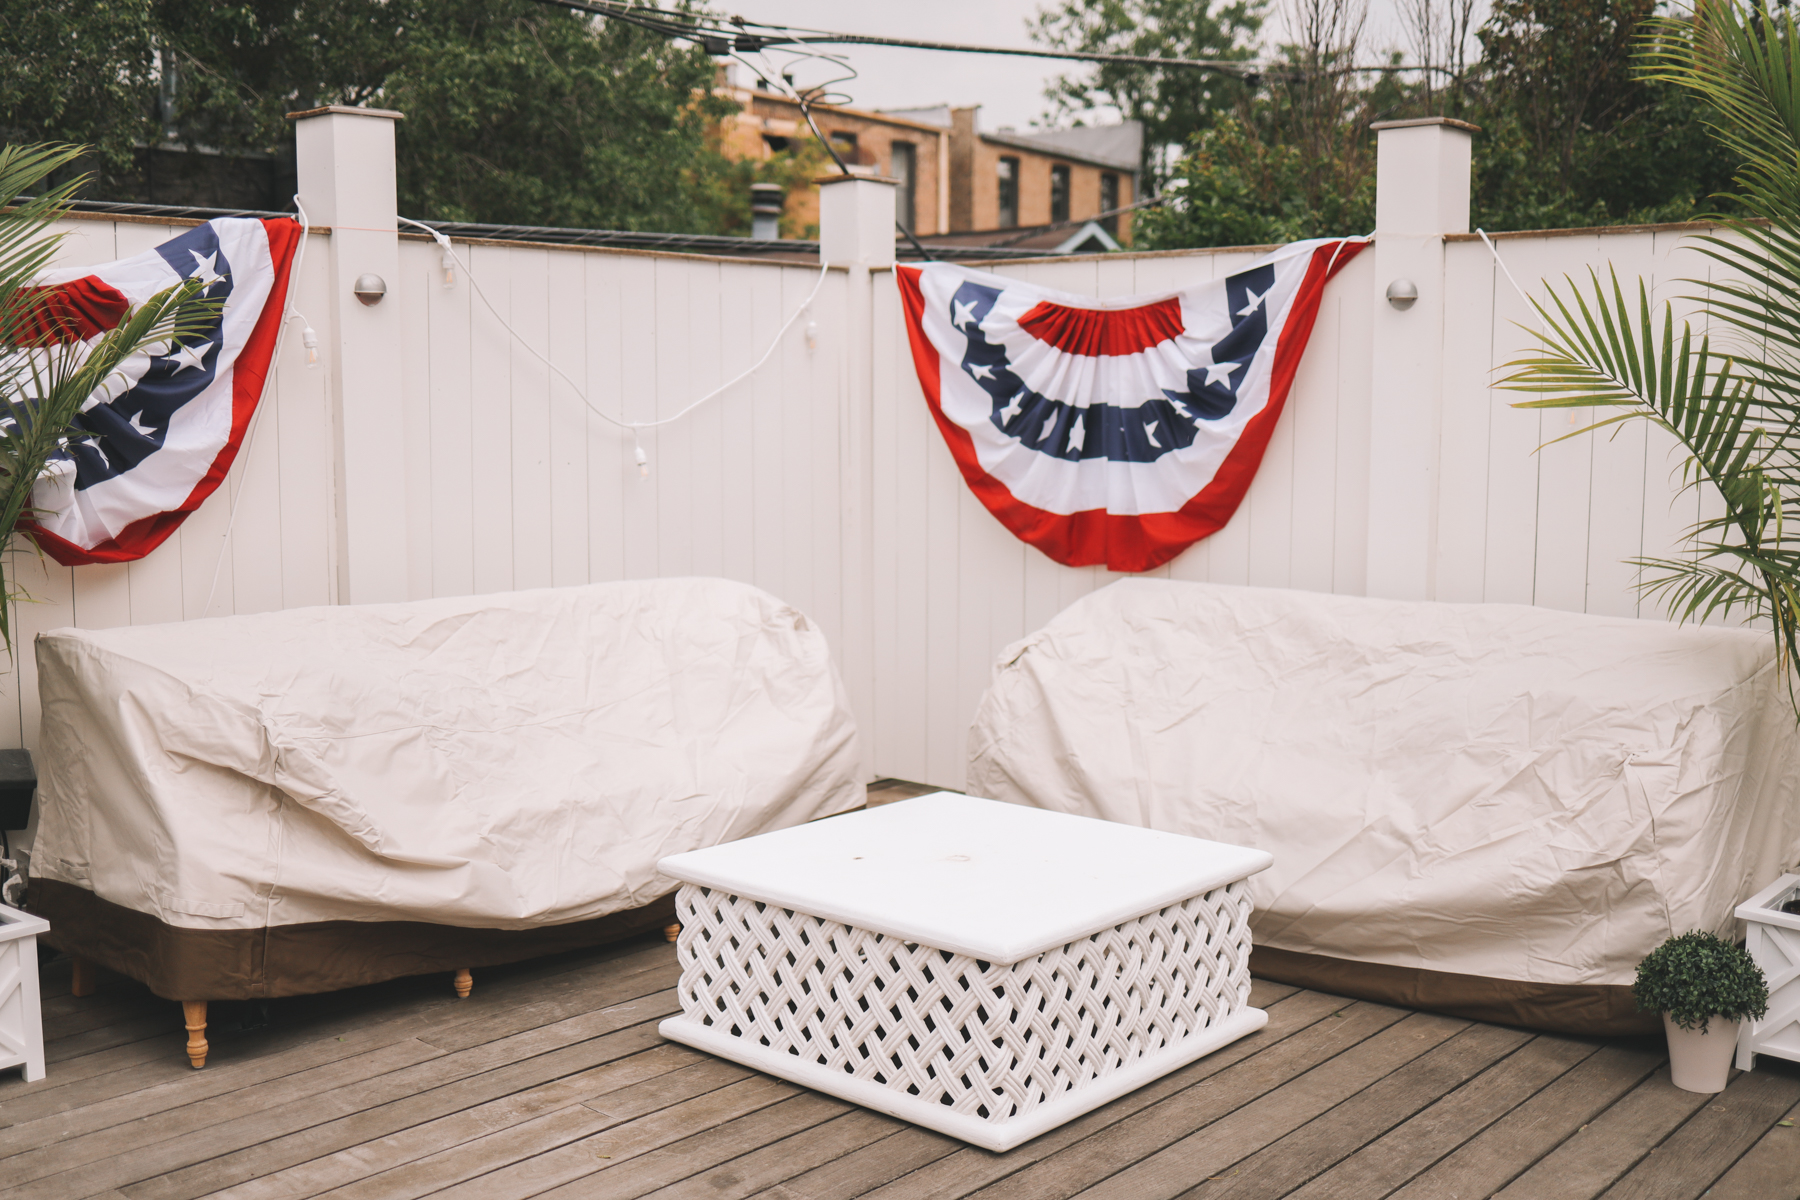 Roofdeck Decor Ideas - Couch covers